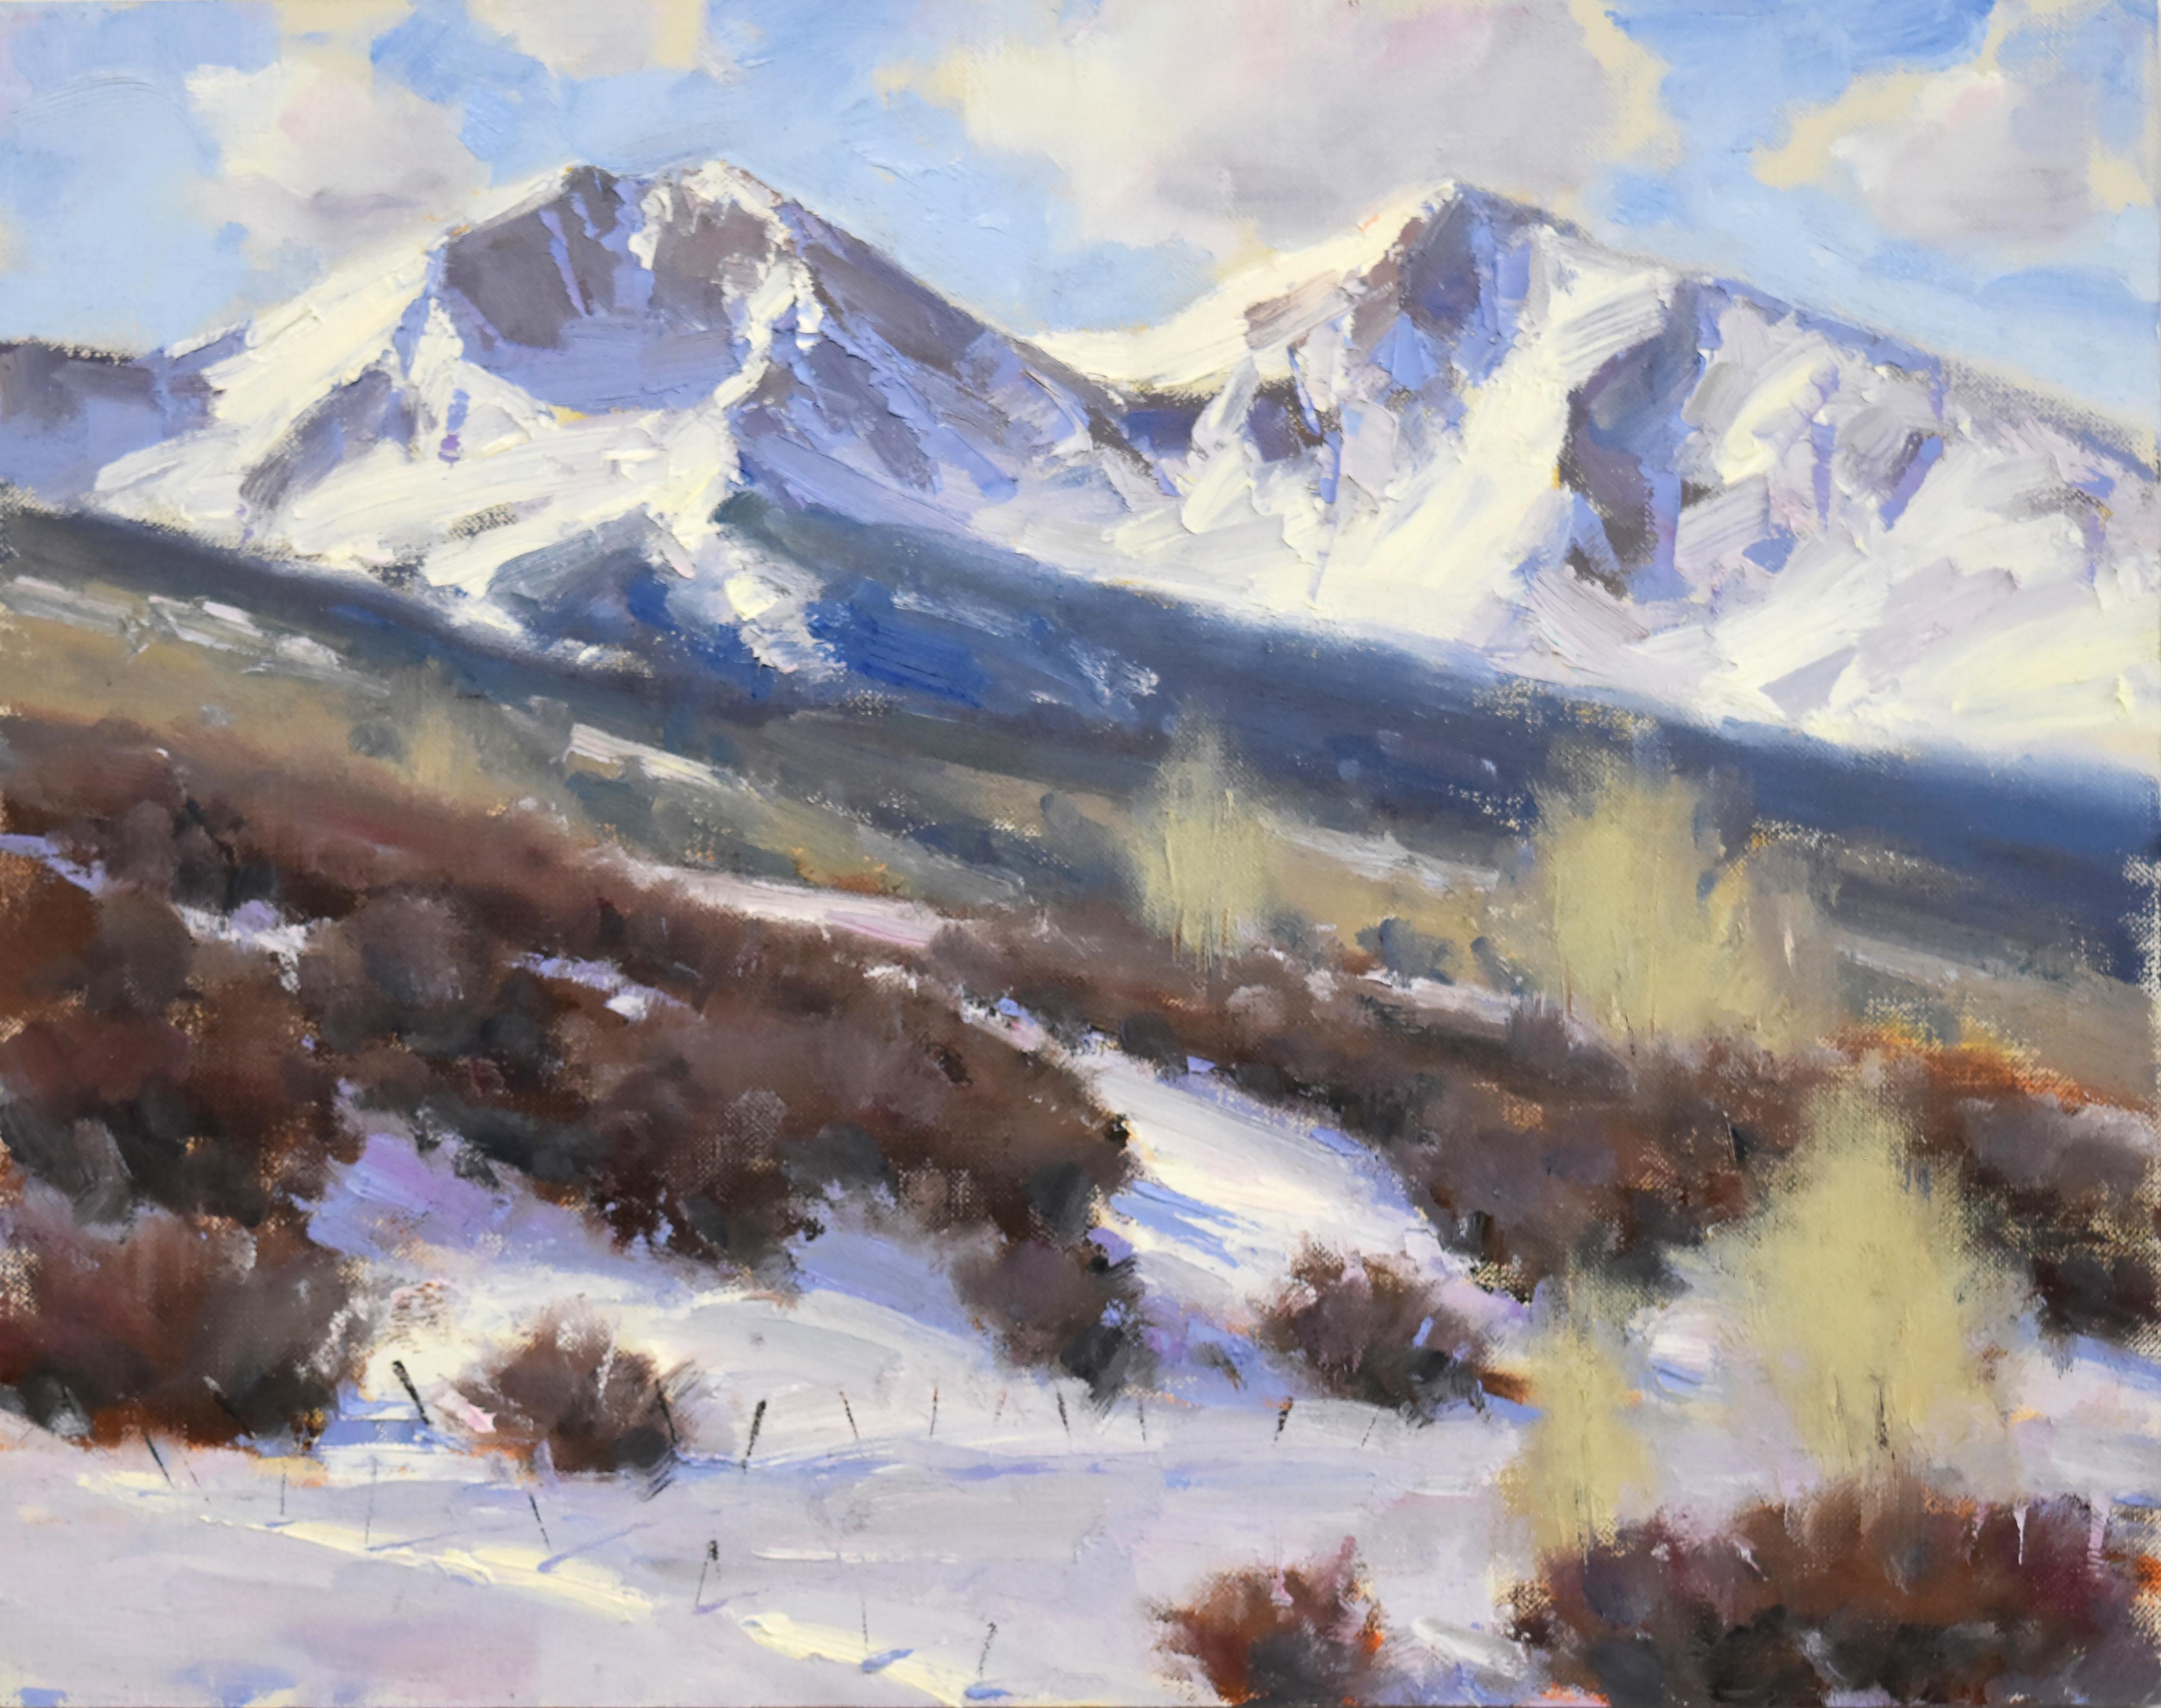 Below Sopris Mountain Ranch (colors of snow, shadows, winter) - Black Landscape Painting by Dan Young